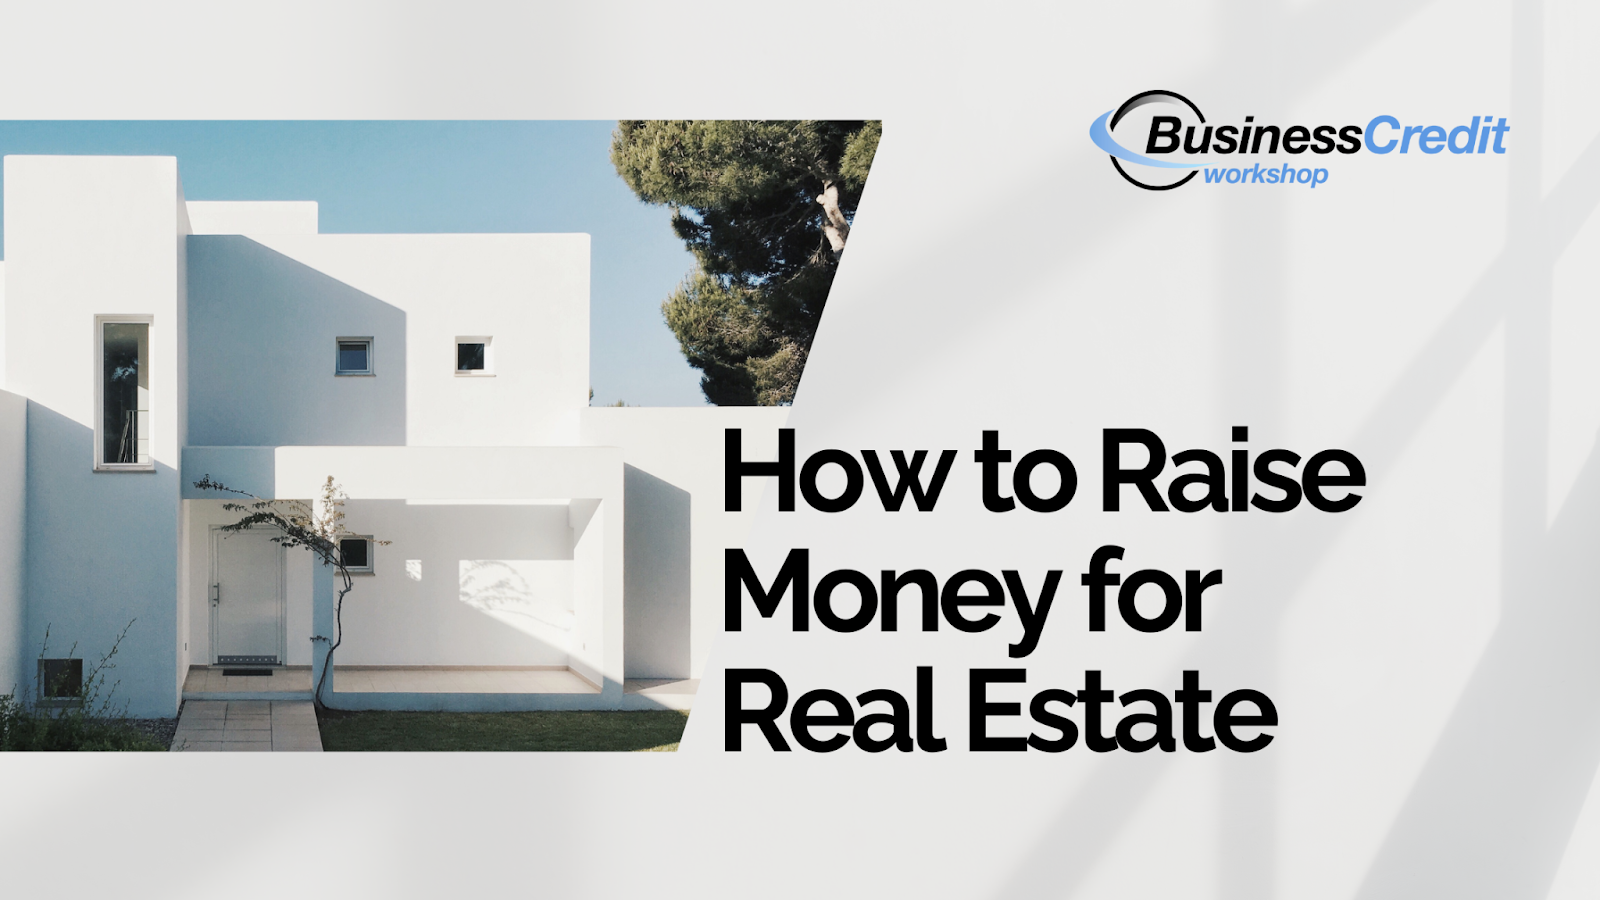 How to raise money for real estate